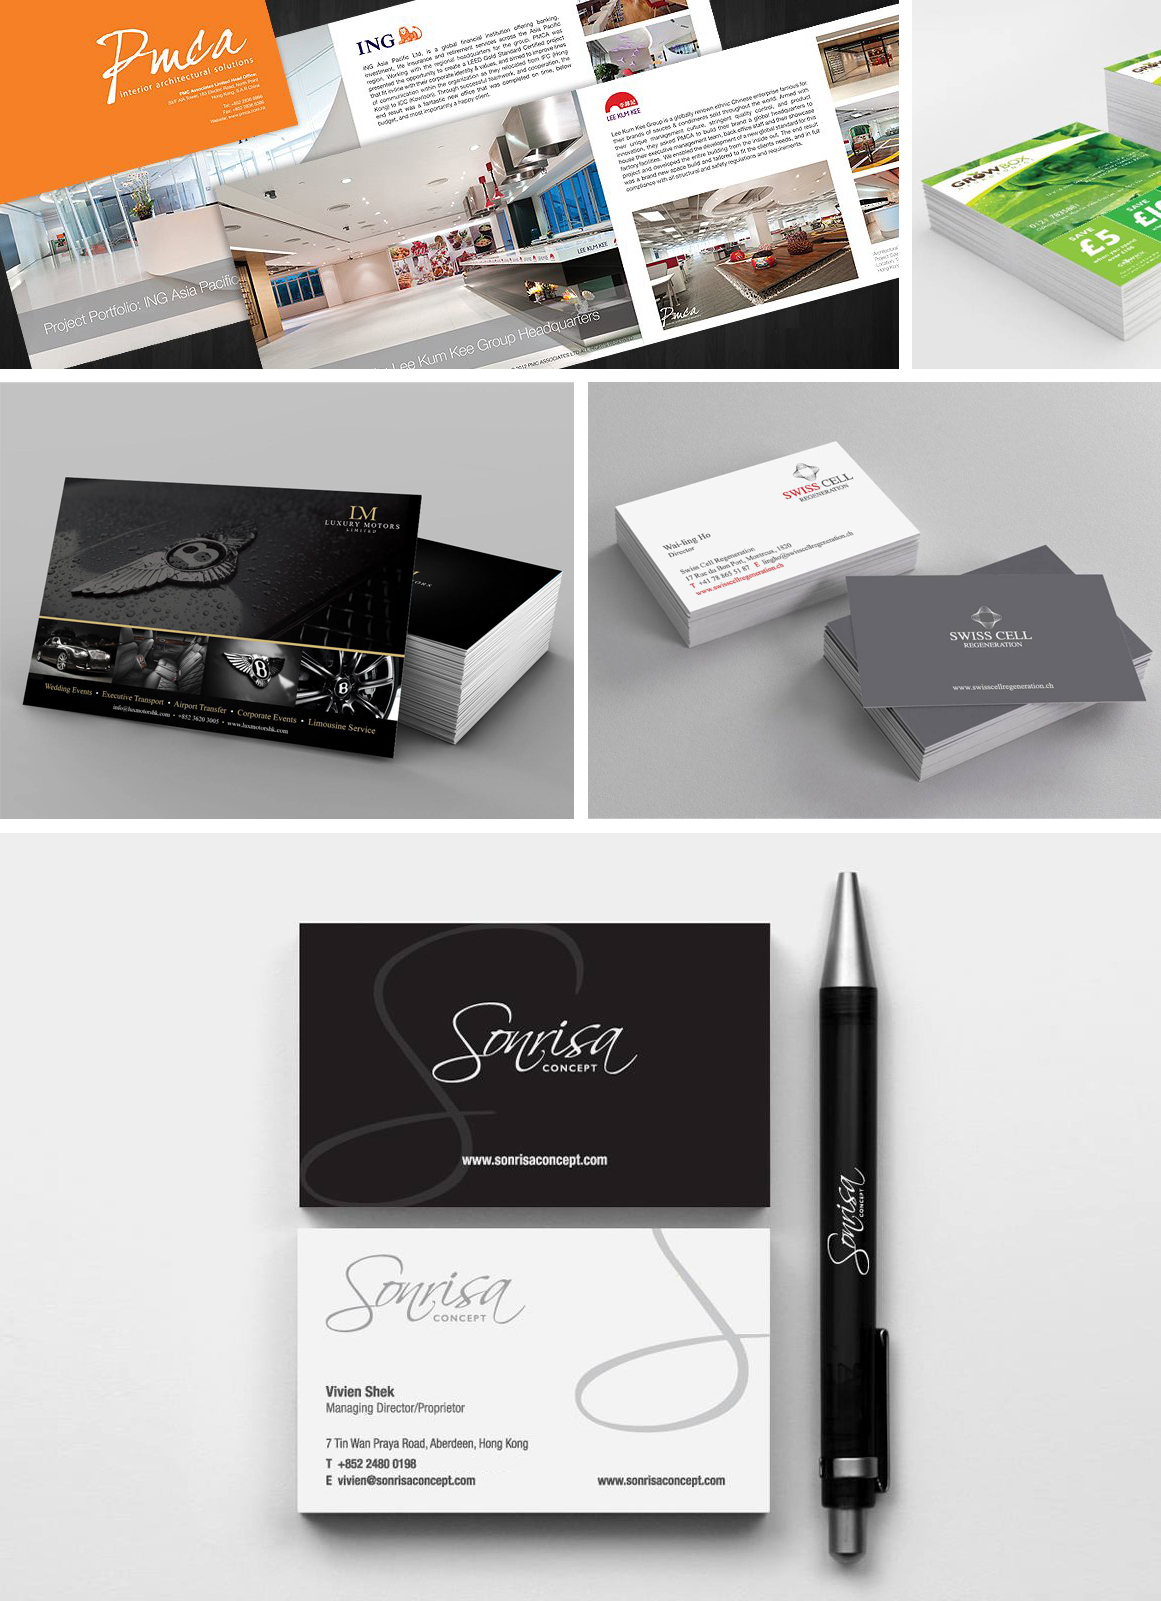 Graphic Design Company in Hong Kong